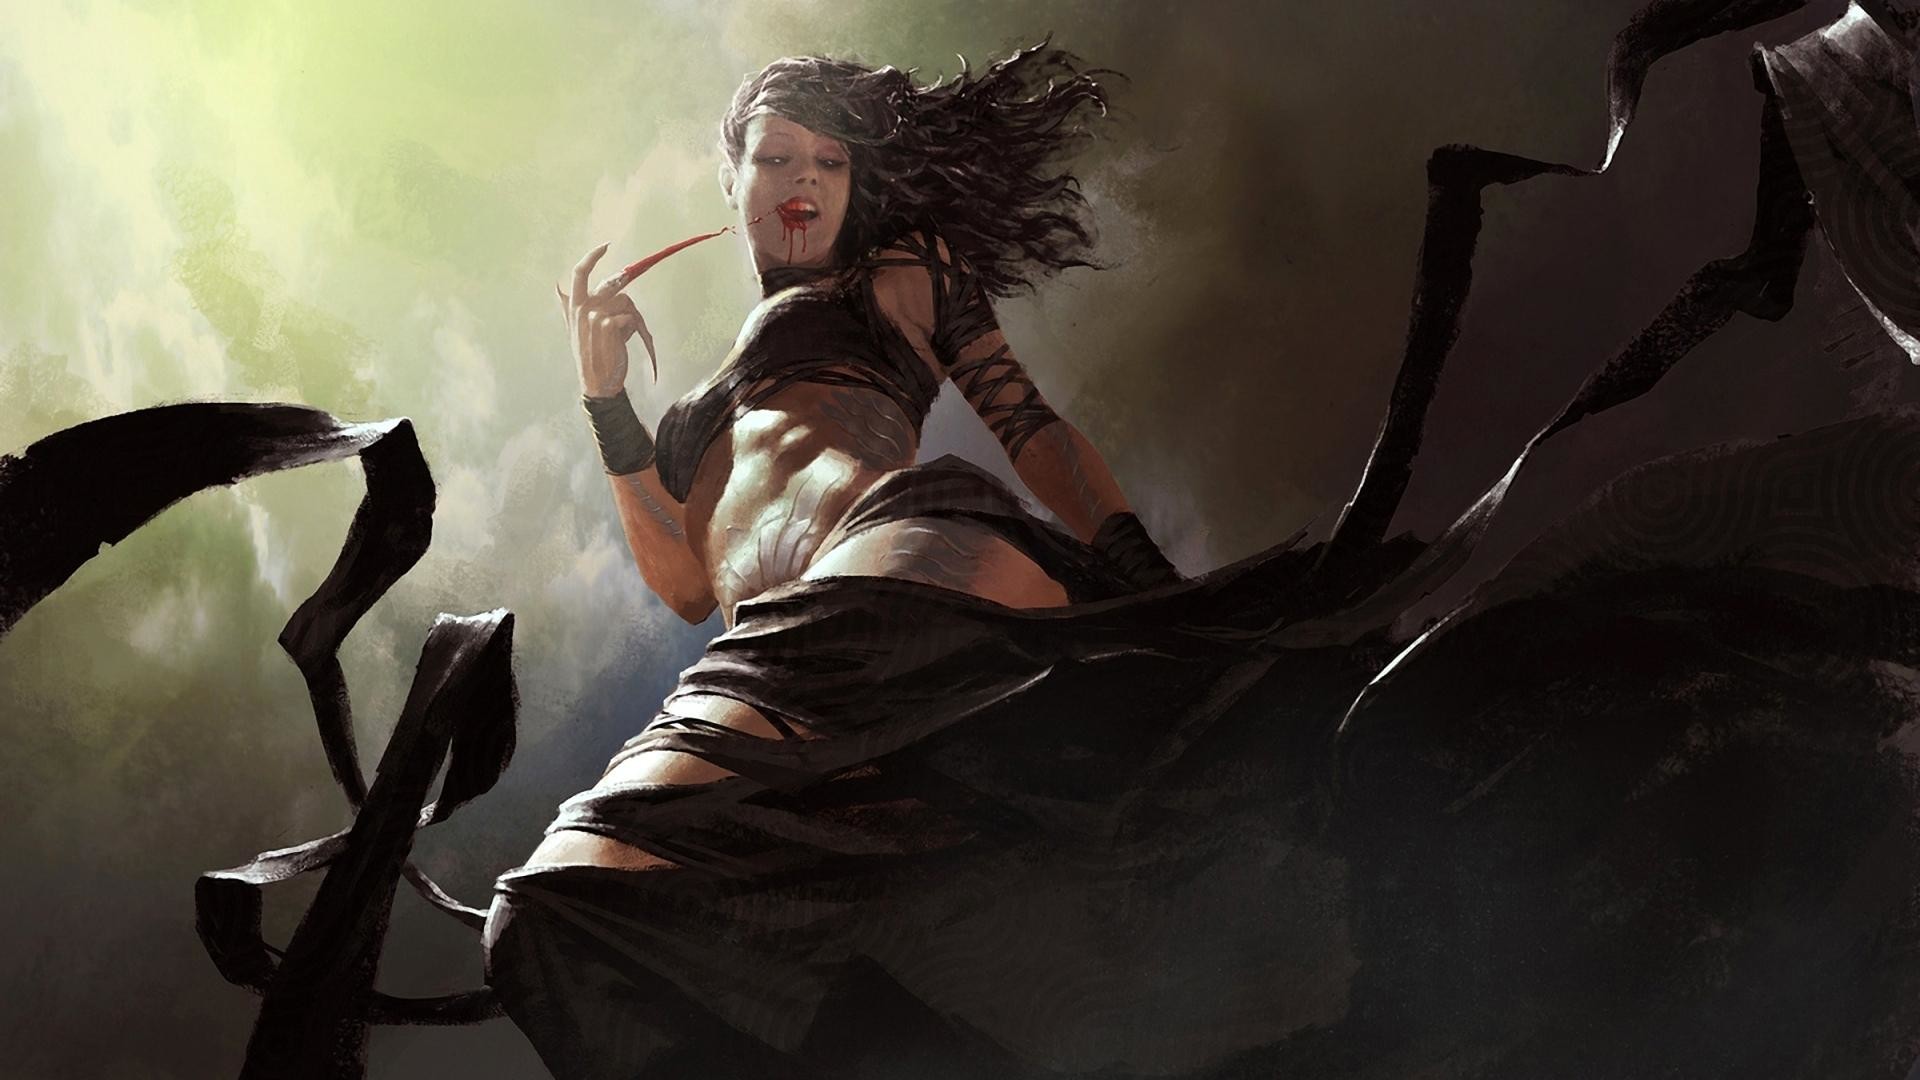 1920x1080 Magic: The Gathering - 150 Wallpapers ()